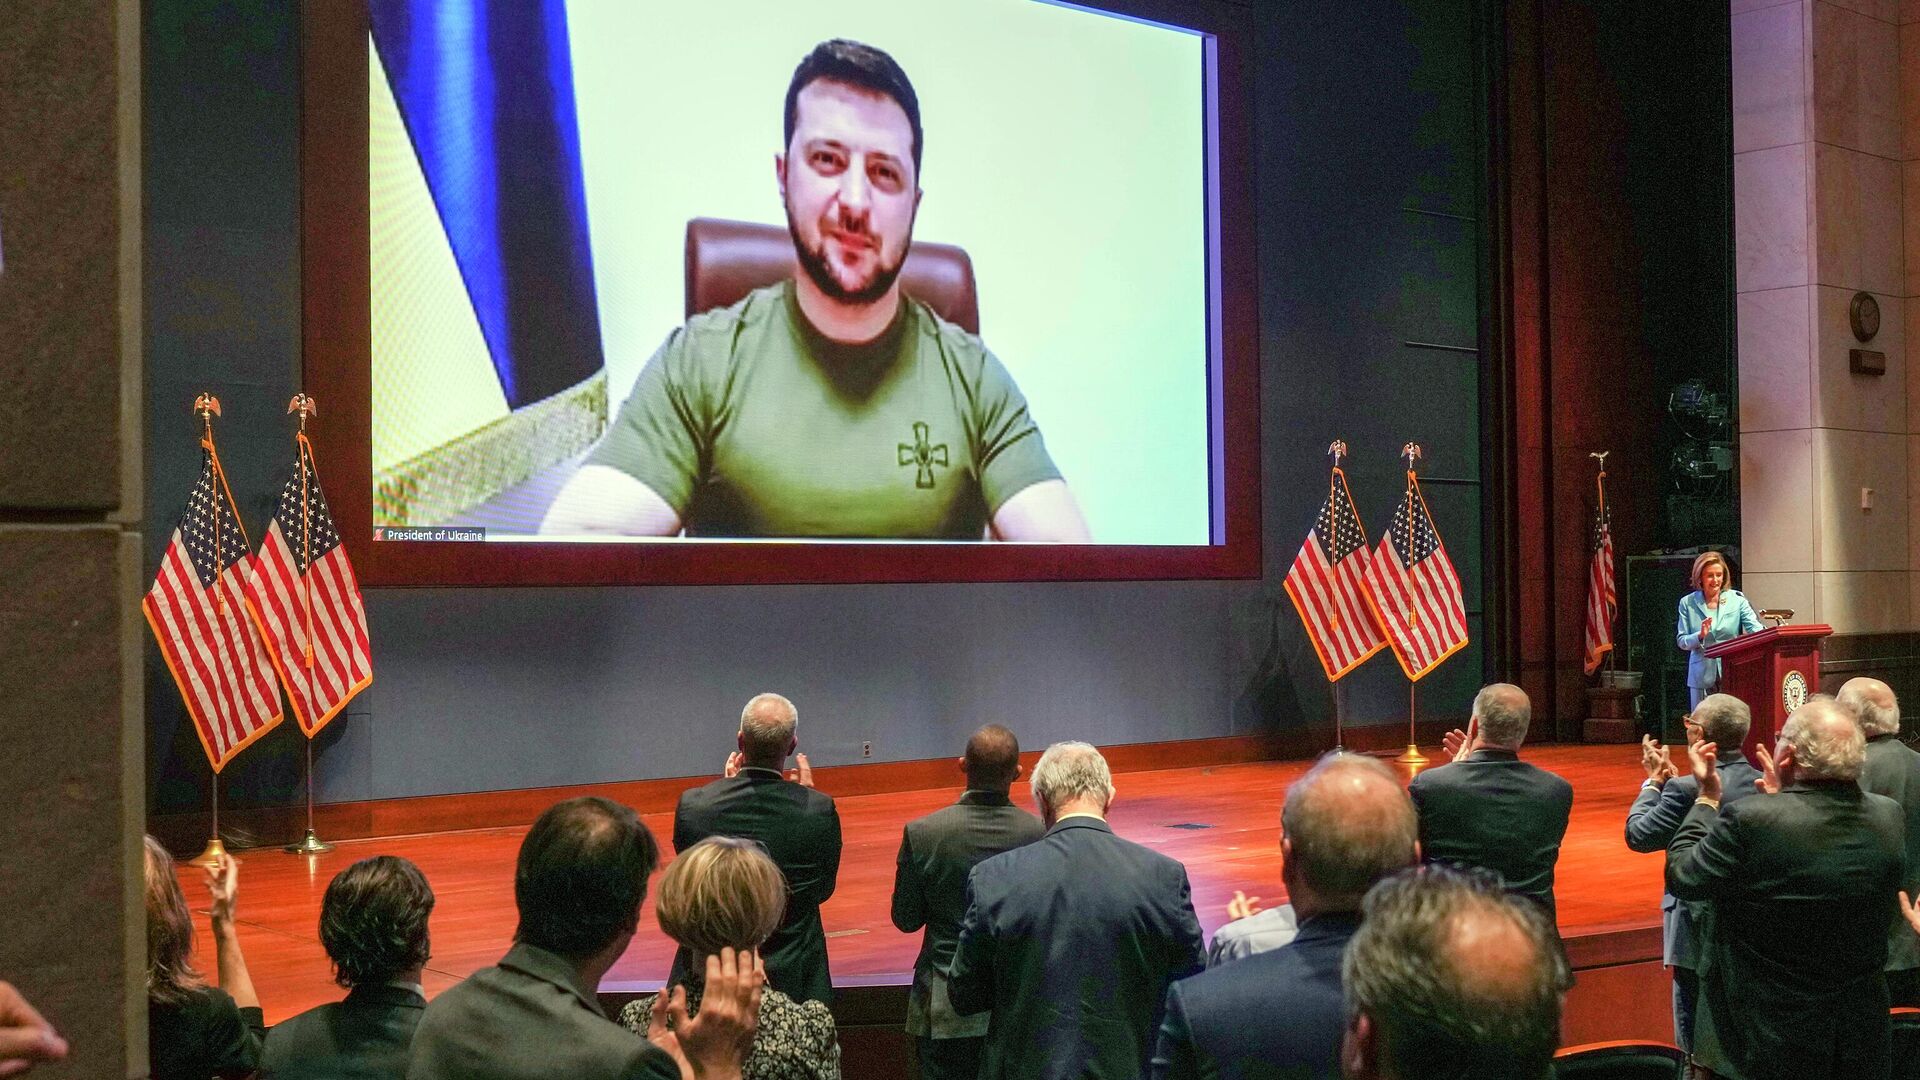 FILE - Members of Congress give Ukraine President Volodymyr Zelensky a standing ovation before he speaks in a virtual address to Congress in the U.S. Capitol Visitors Center Congressional Auditorium in Washington, on Wednesday, March 16, 2022 - Sputnik International, 1920, 21.12.2022